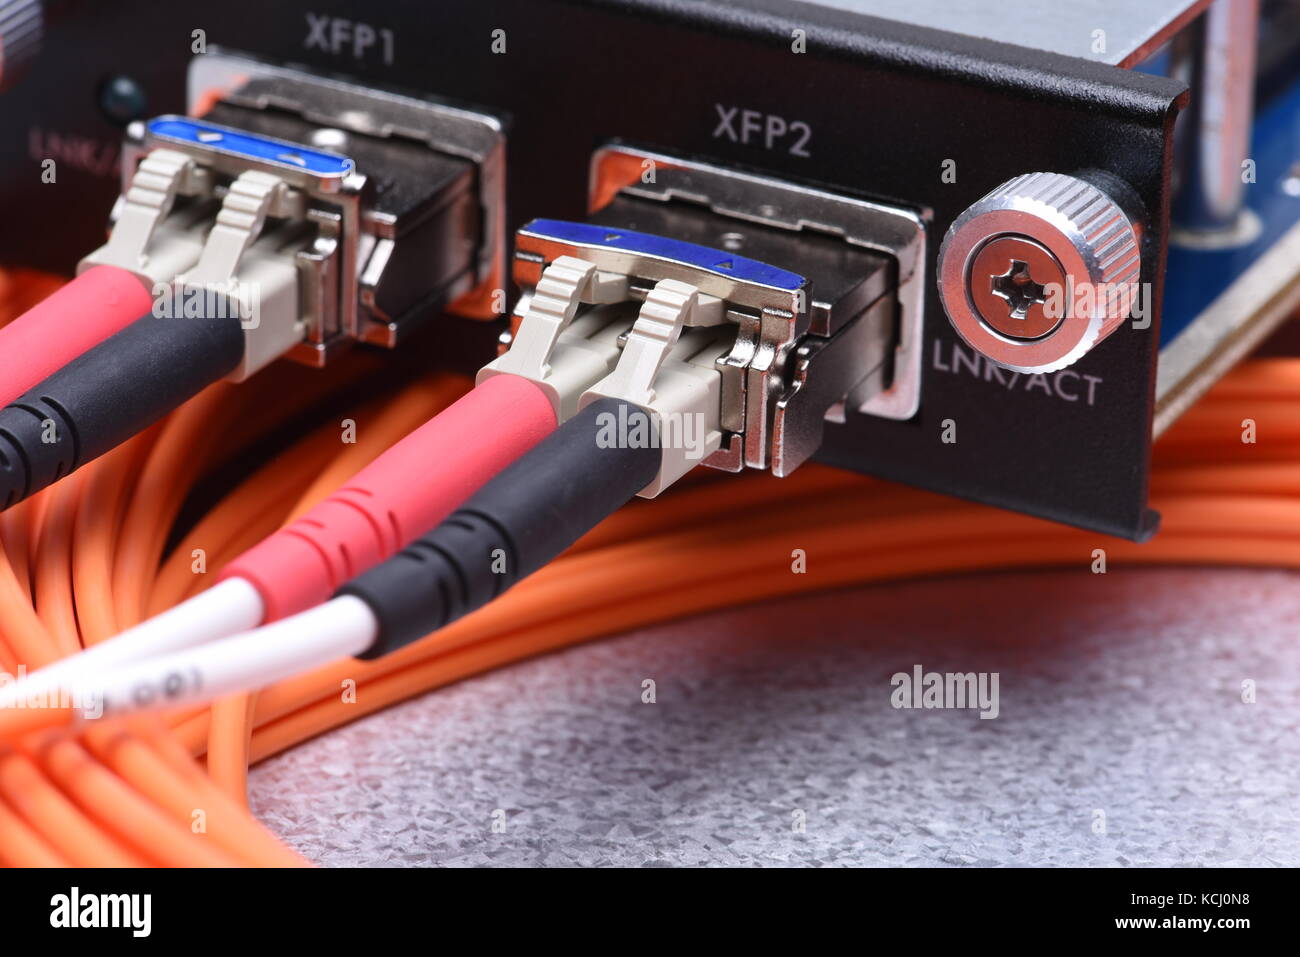 Network optical fiber cables connected to gigabit interface converter Stock Photo